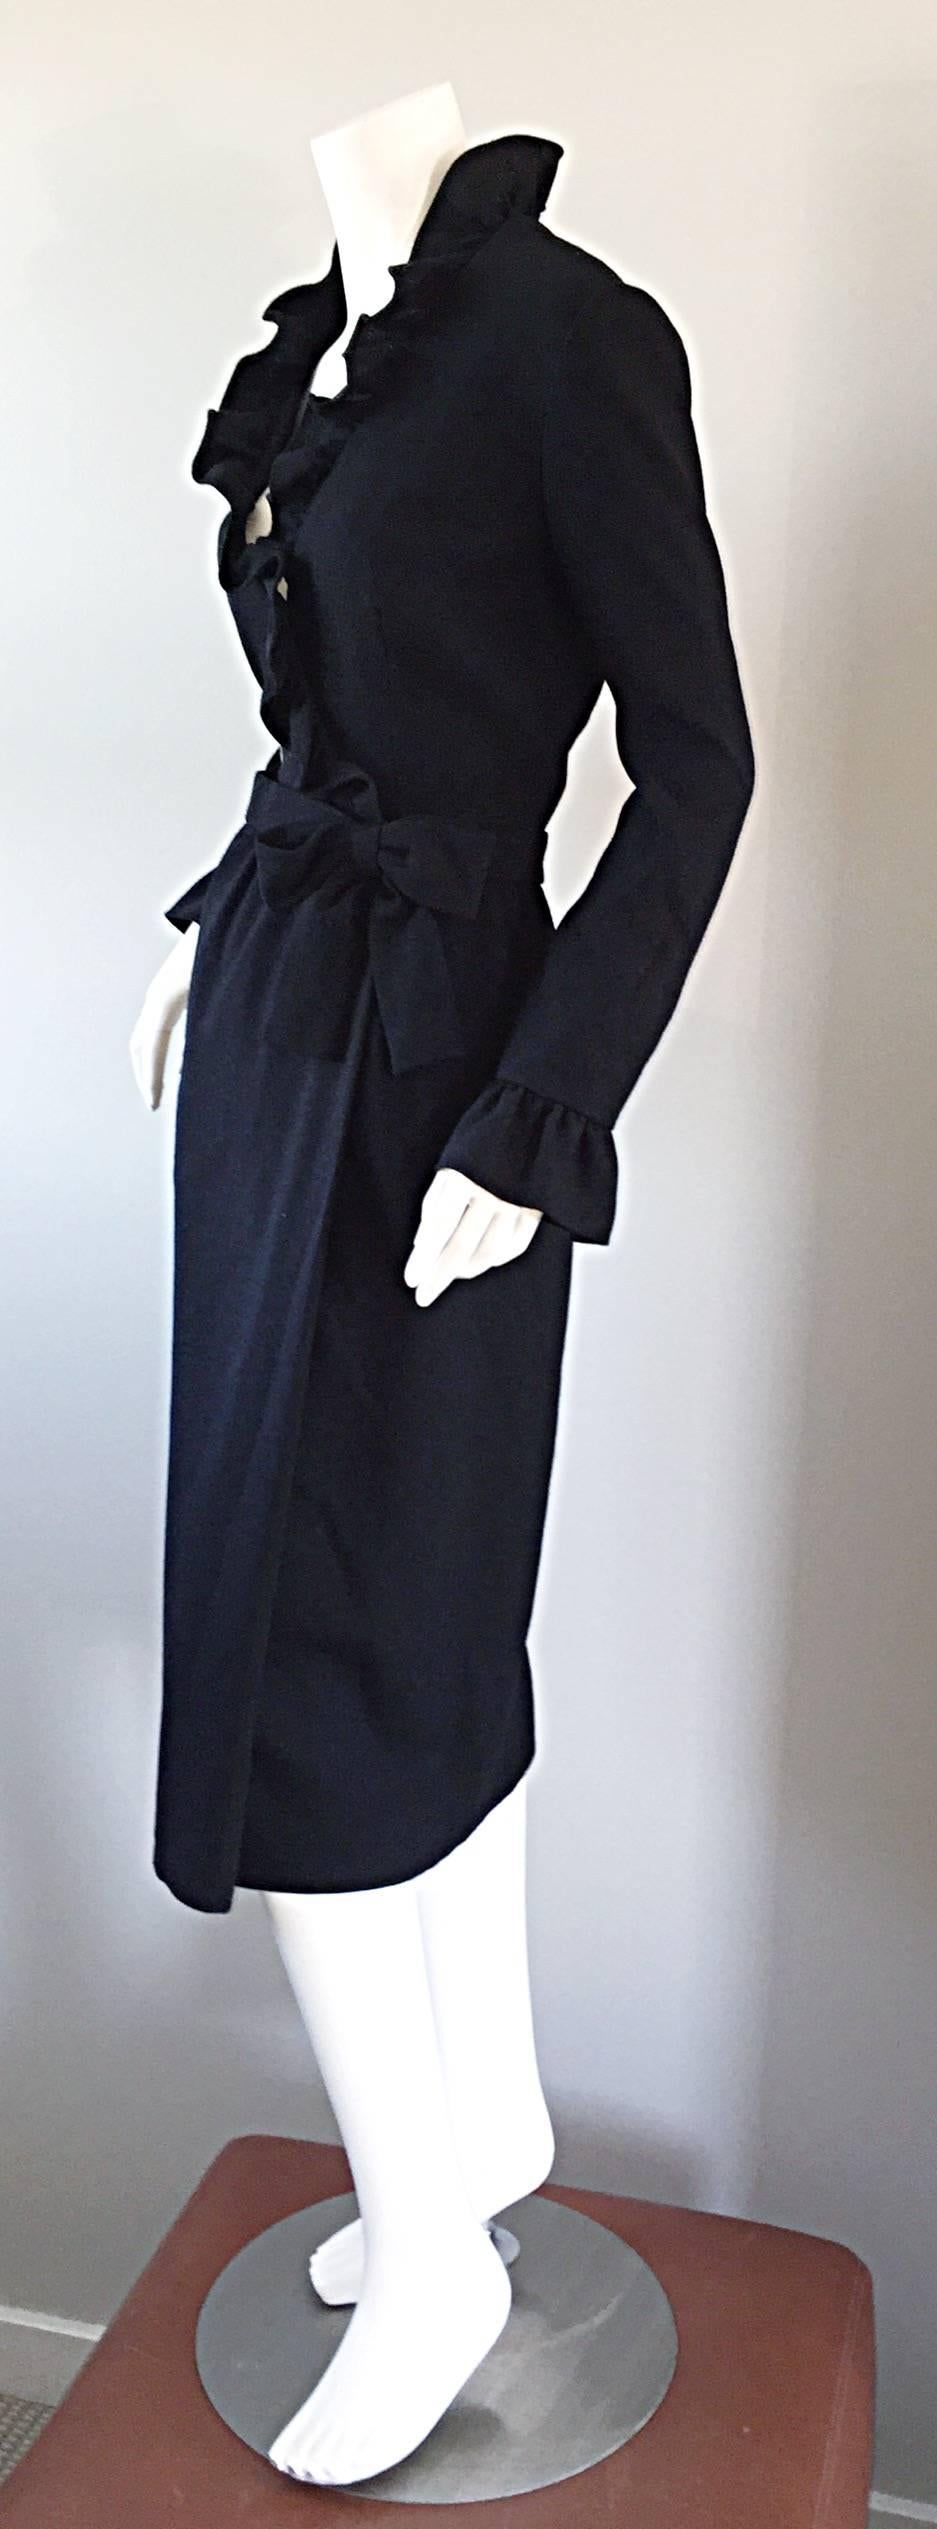 Chic late 1960s Mollie Parnis black wool wrap dress! Flattering fit, with a ruffled neckline, and ruffled bell sleeves. Wrap style, with bow belt detail at side waist. Interior hook-and-eye closure, with full hidden metal zipper in the back. Fully